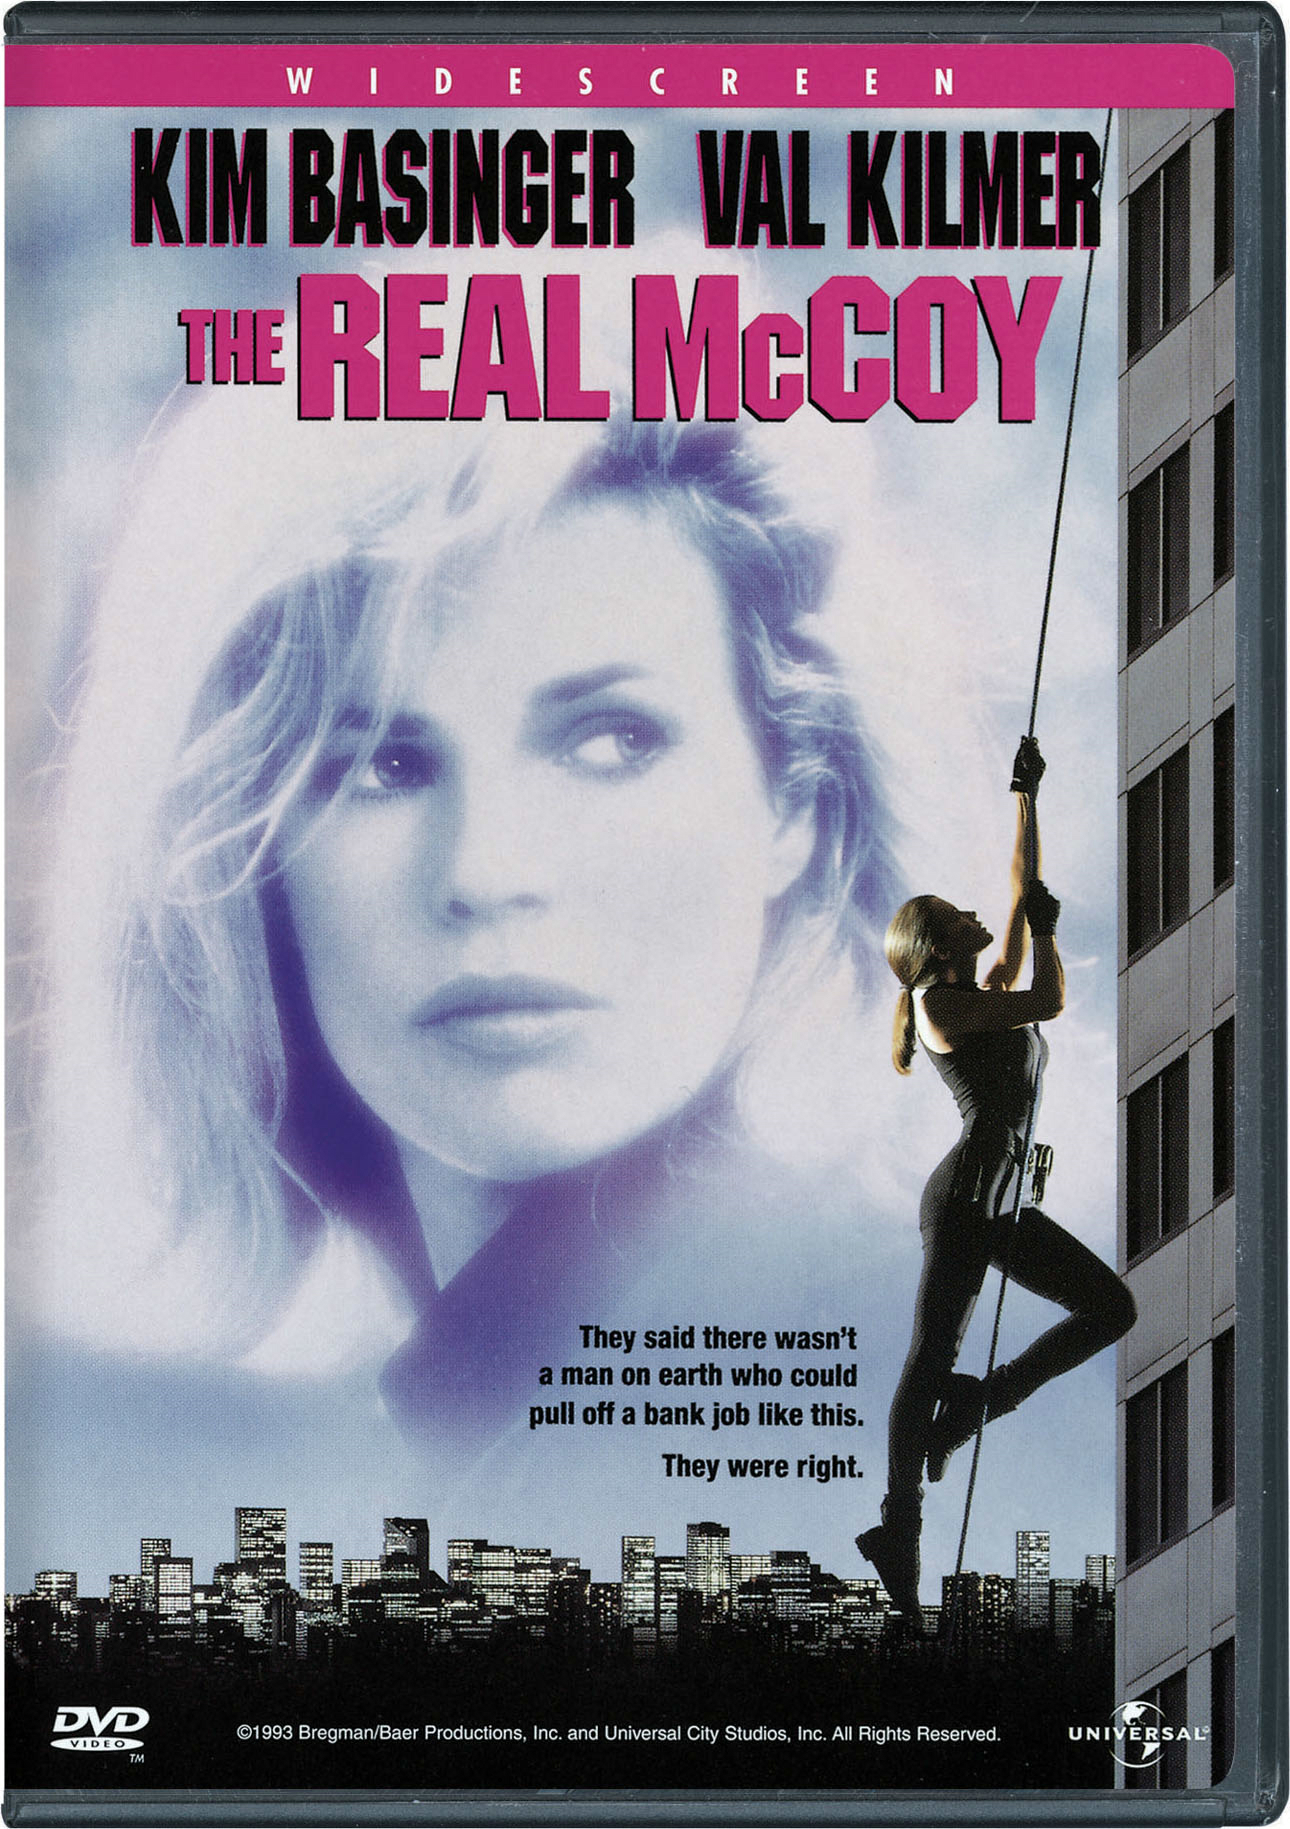 The Real McCoy (DVD Widescreen) - DVD [ 1993 ]  - Thriller Movies On DVD - Movies On GRUV